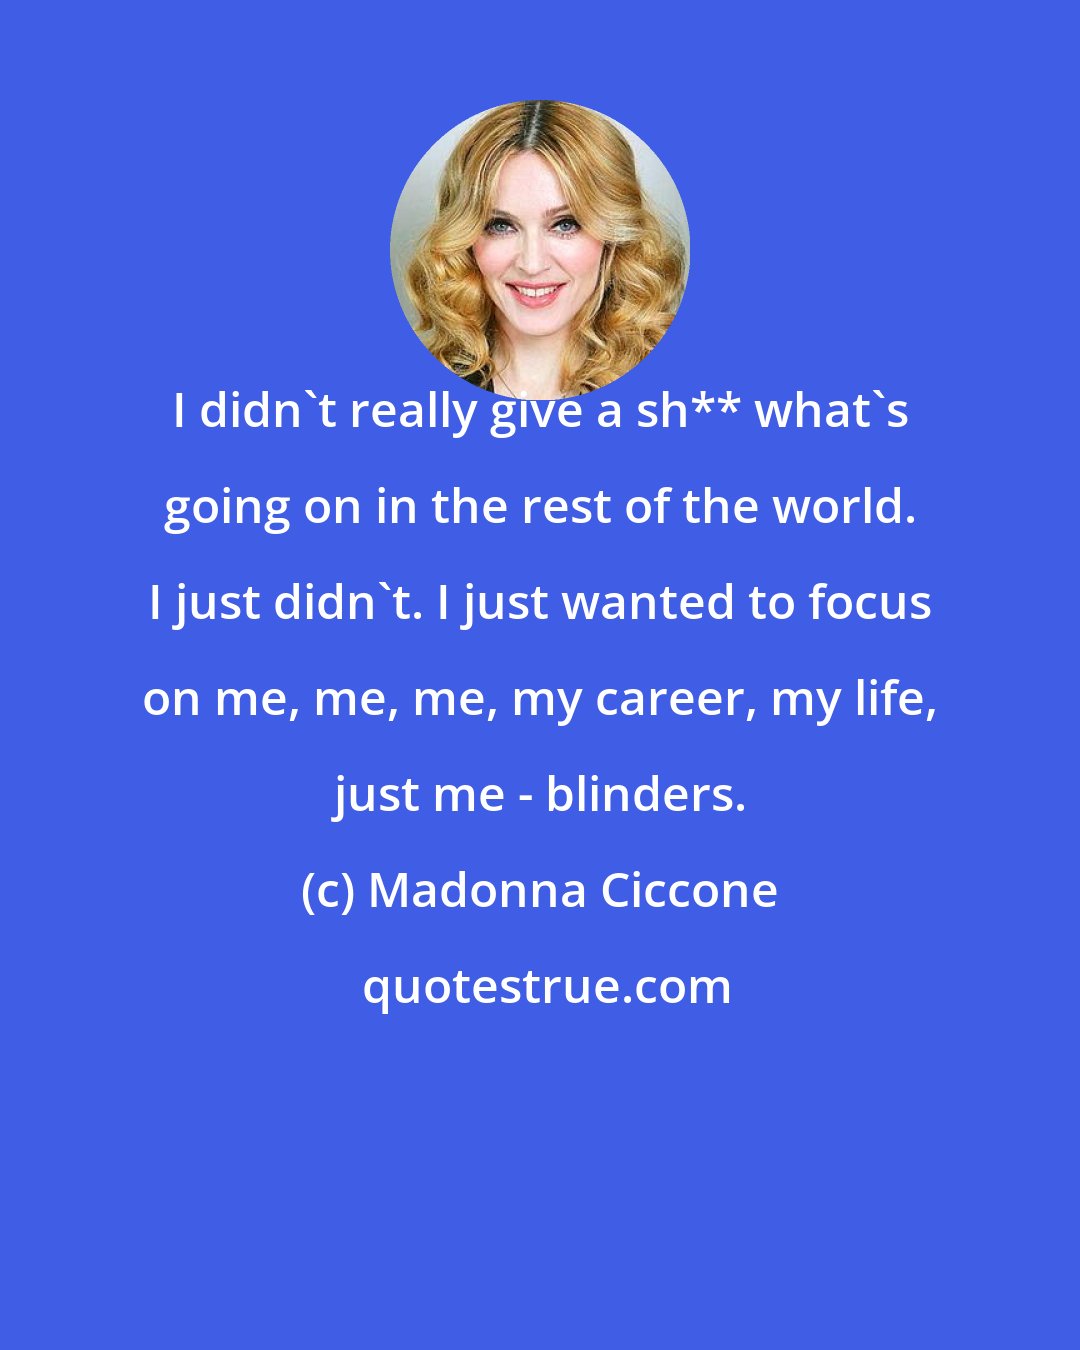 Madonna Ciccone: I didn't really give a sh** what's going on in the rest of the world. I just didn't. I just wanted to focus on me, me, me, my career, my life, just me - blinders.